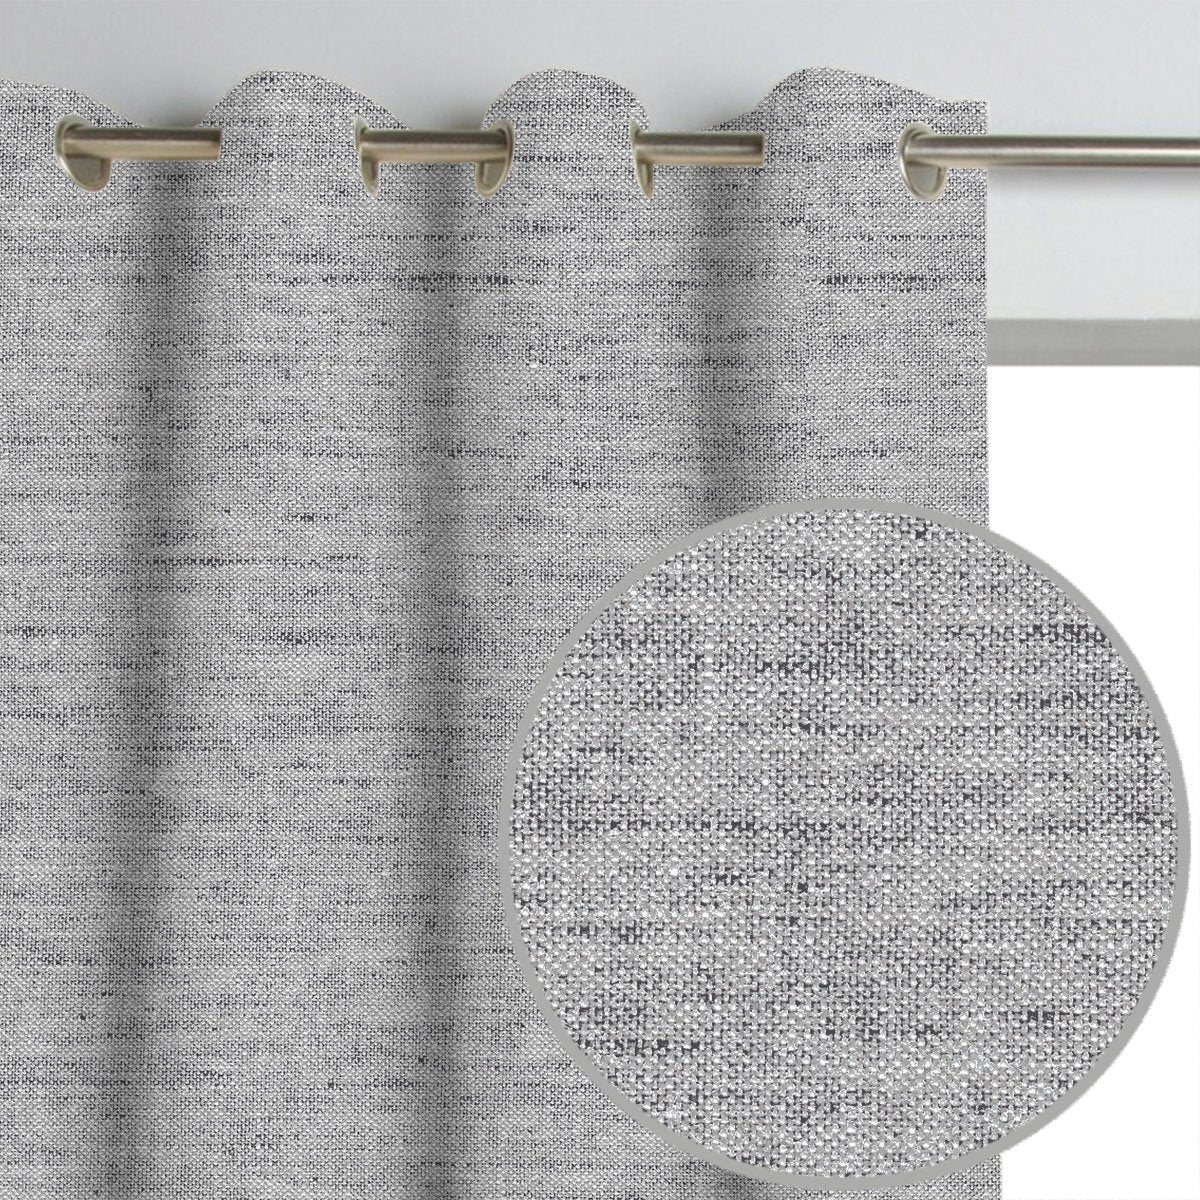 Pair of Grayson Linen Textured Curtains and Pair of Sheers